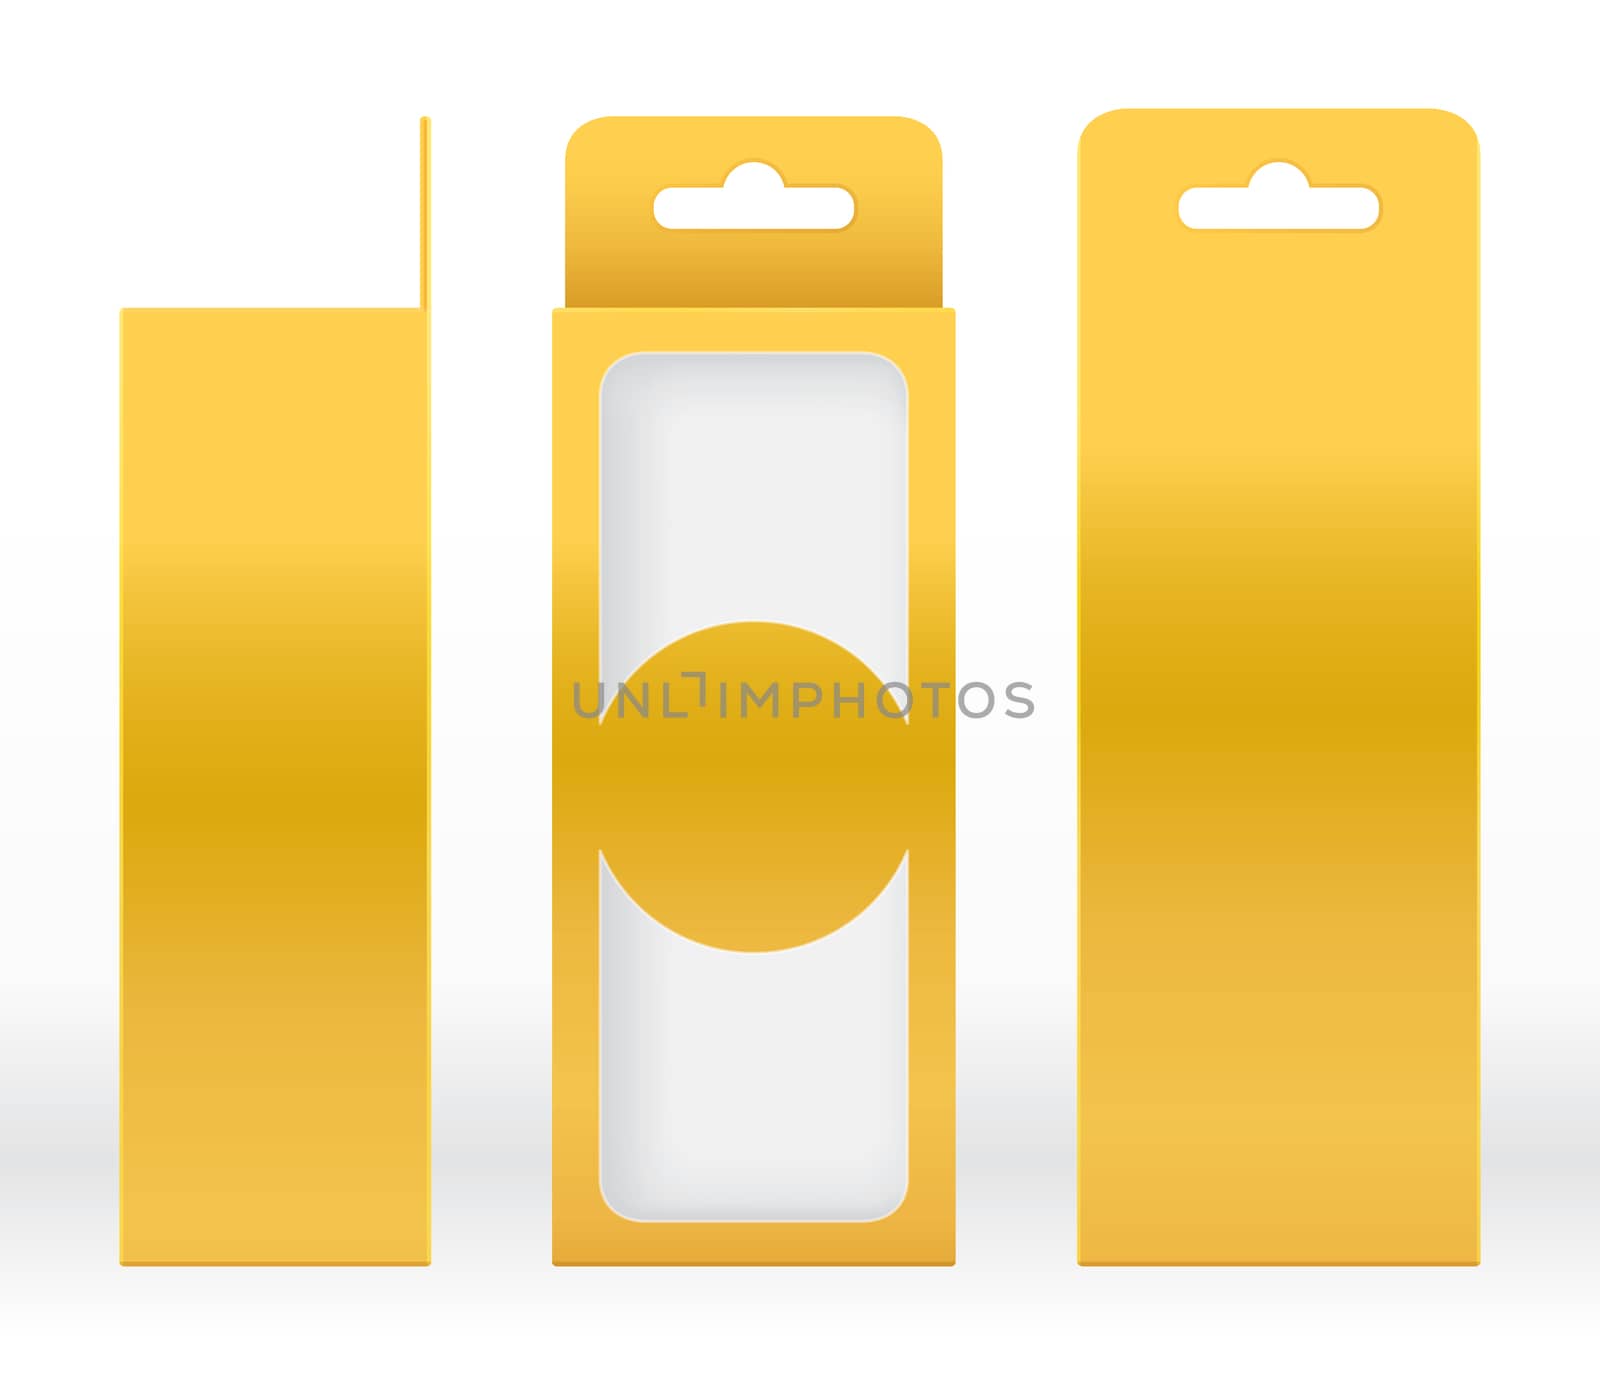 Hanging Box Gold window shape cut out Packaging Template blank. Luxury Empty Box Golden yellow Template for design product package gift box, Yellow Gold Box packaging paper kraft cardboard package